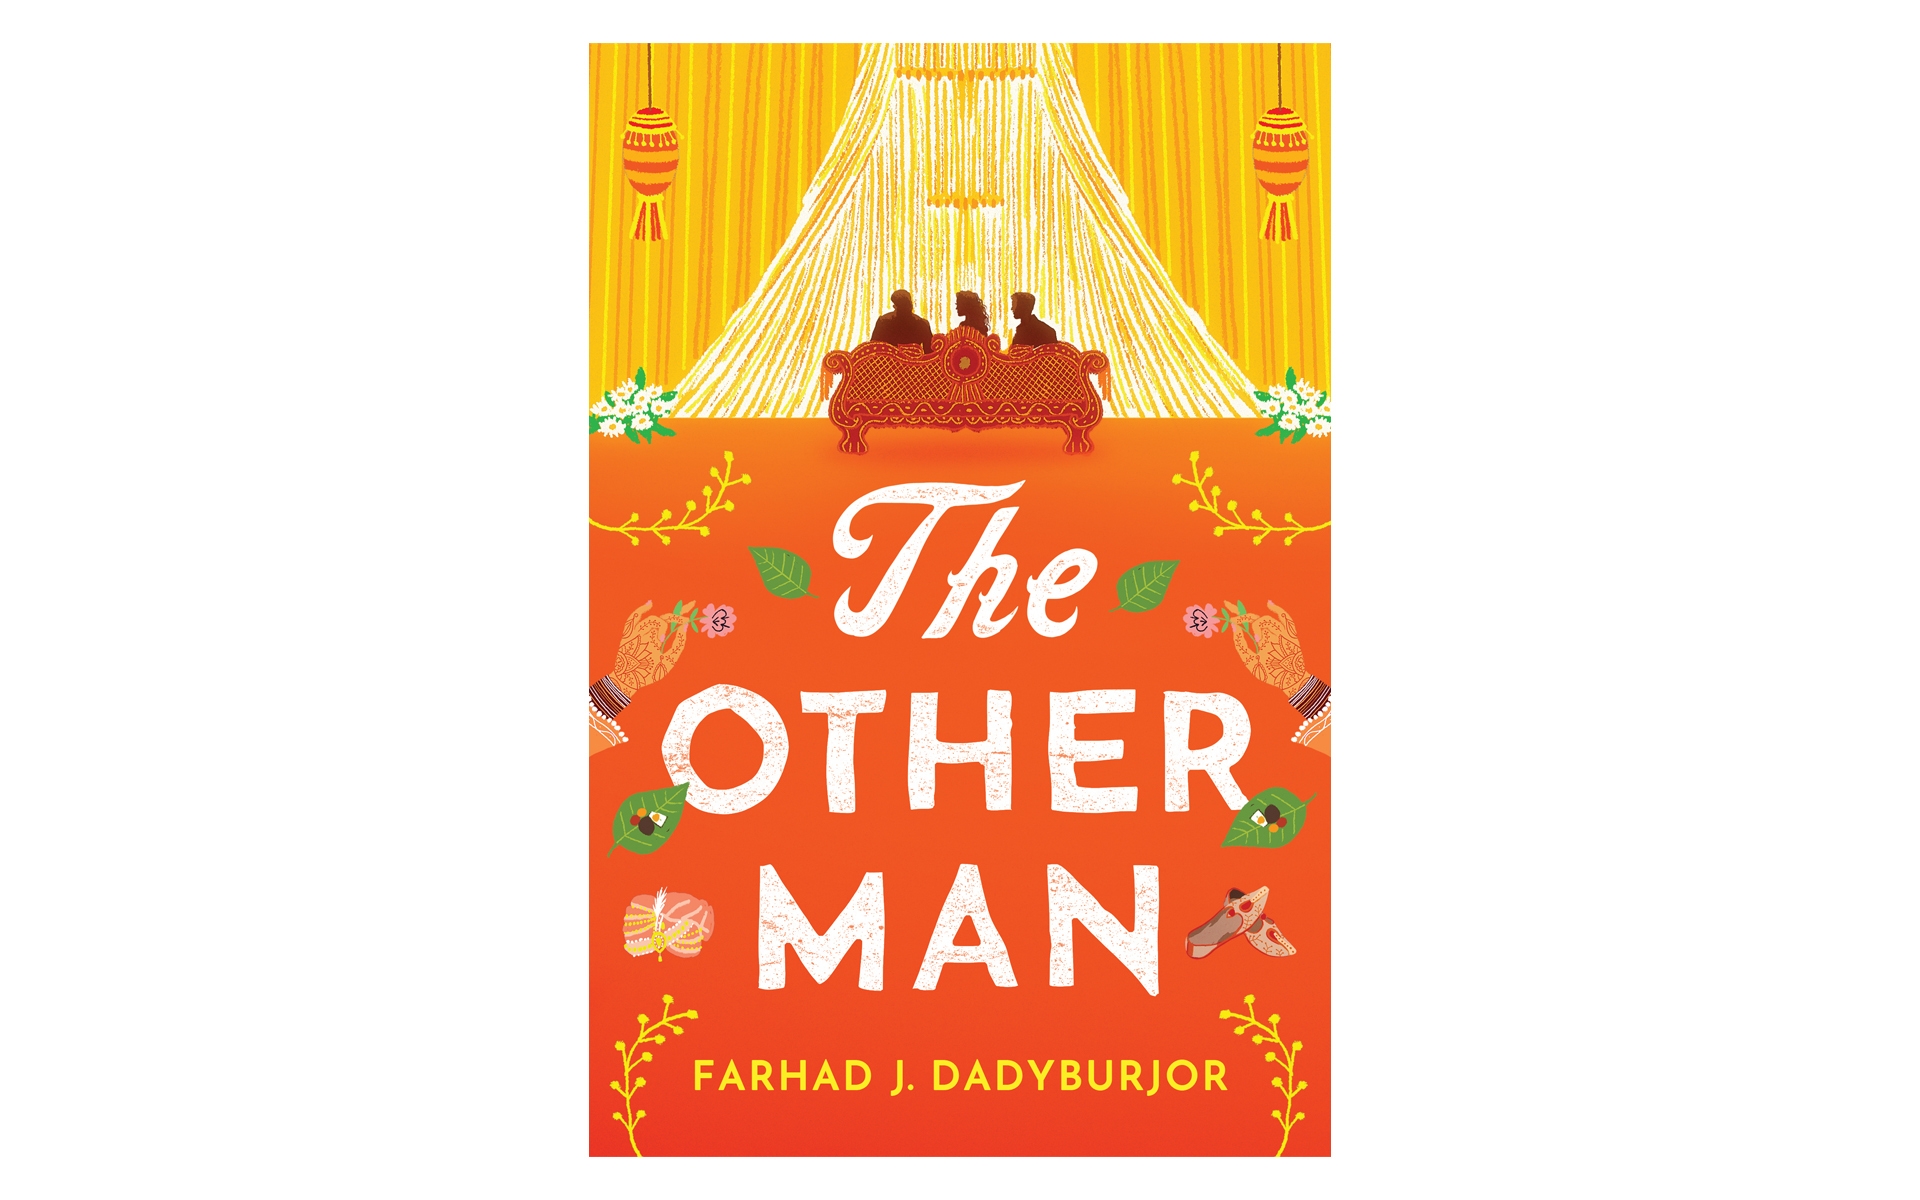 Cover art for the book "The Other Man"